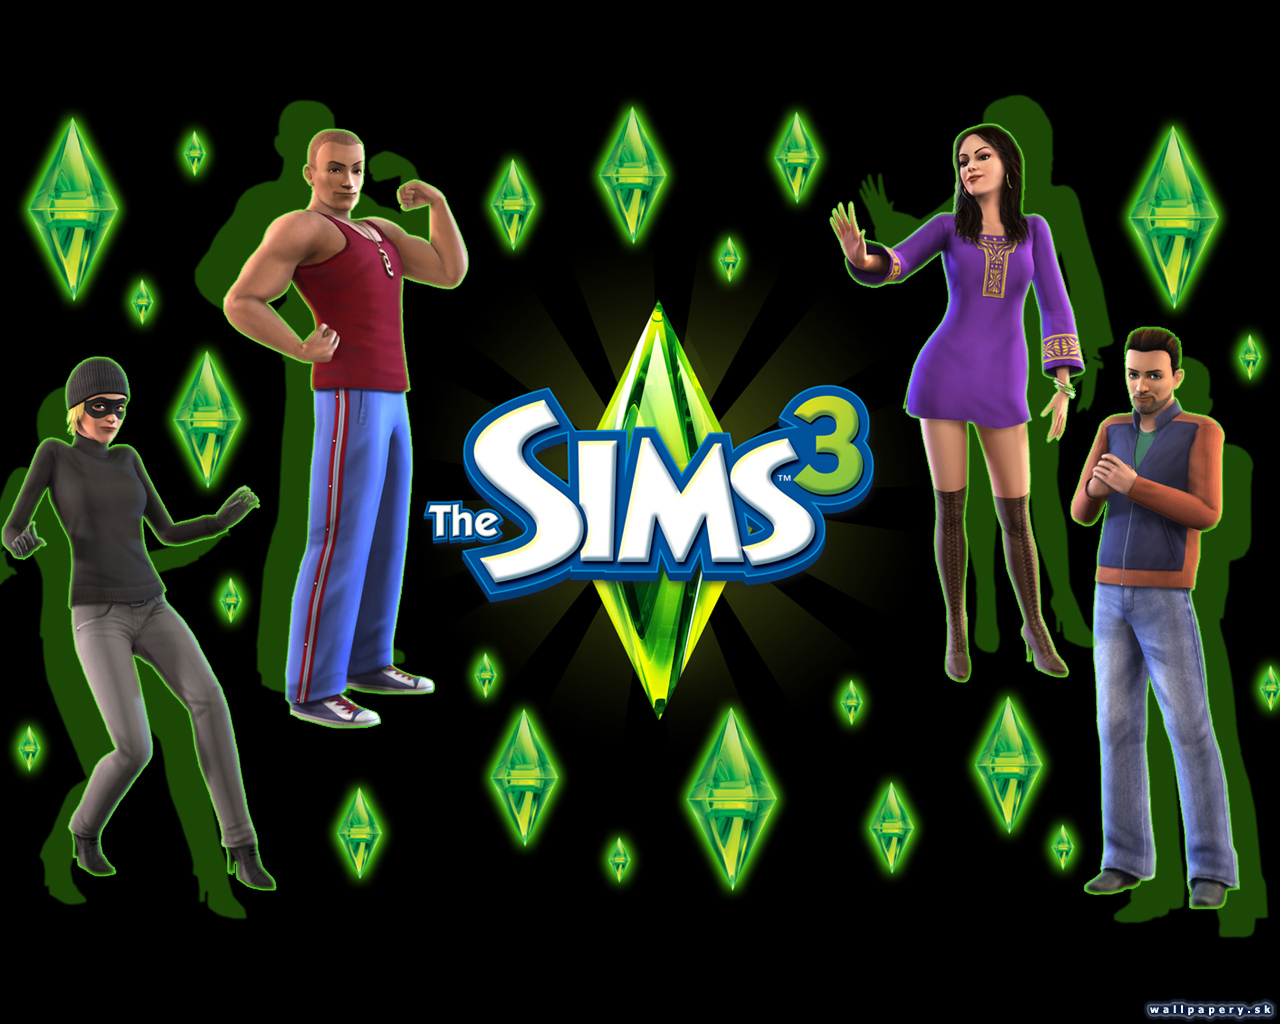 The Sims 3 - wallpaper 20